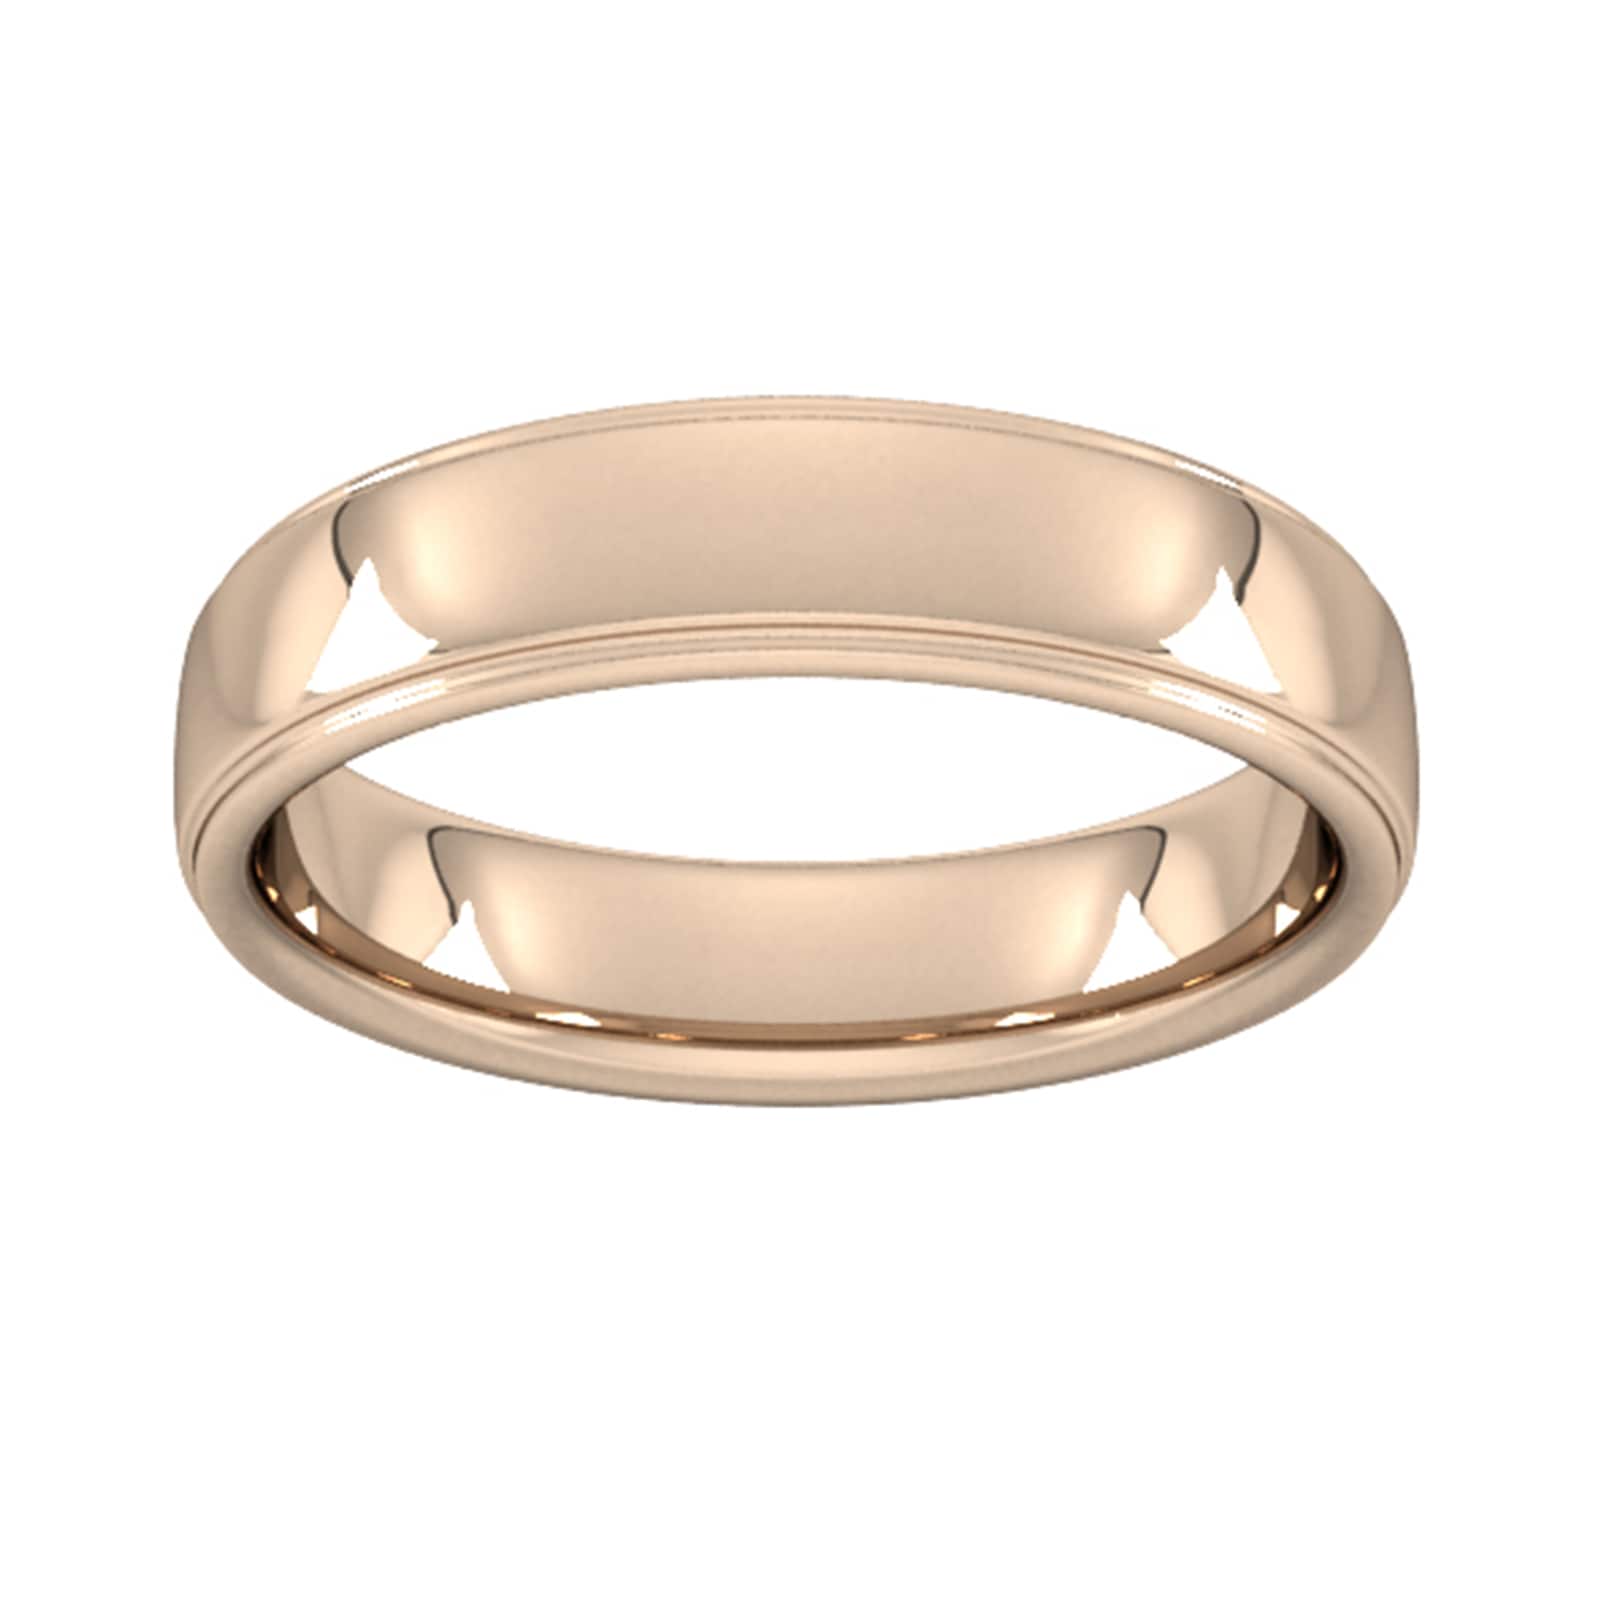 5mm Flat Court Heavy Polished Finish With Grooves Wedding Ring In 18 Carat Rose Gold - Ring Size N